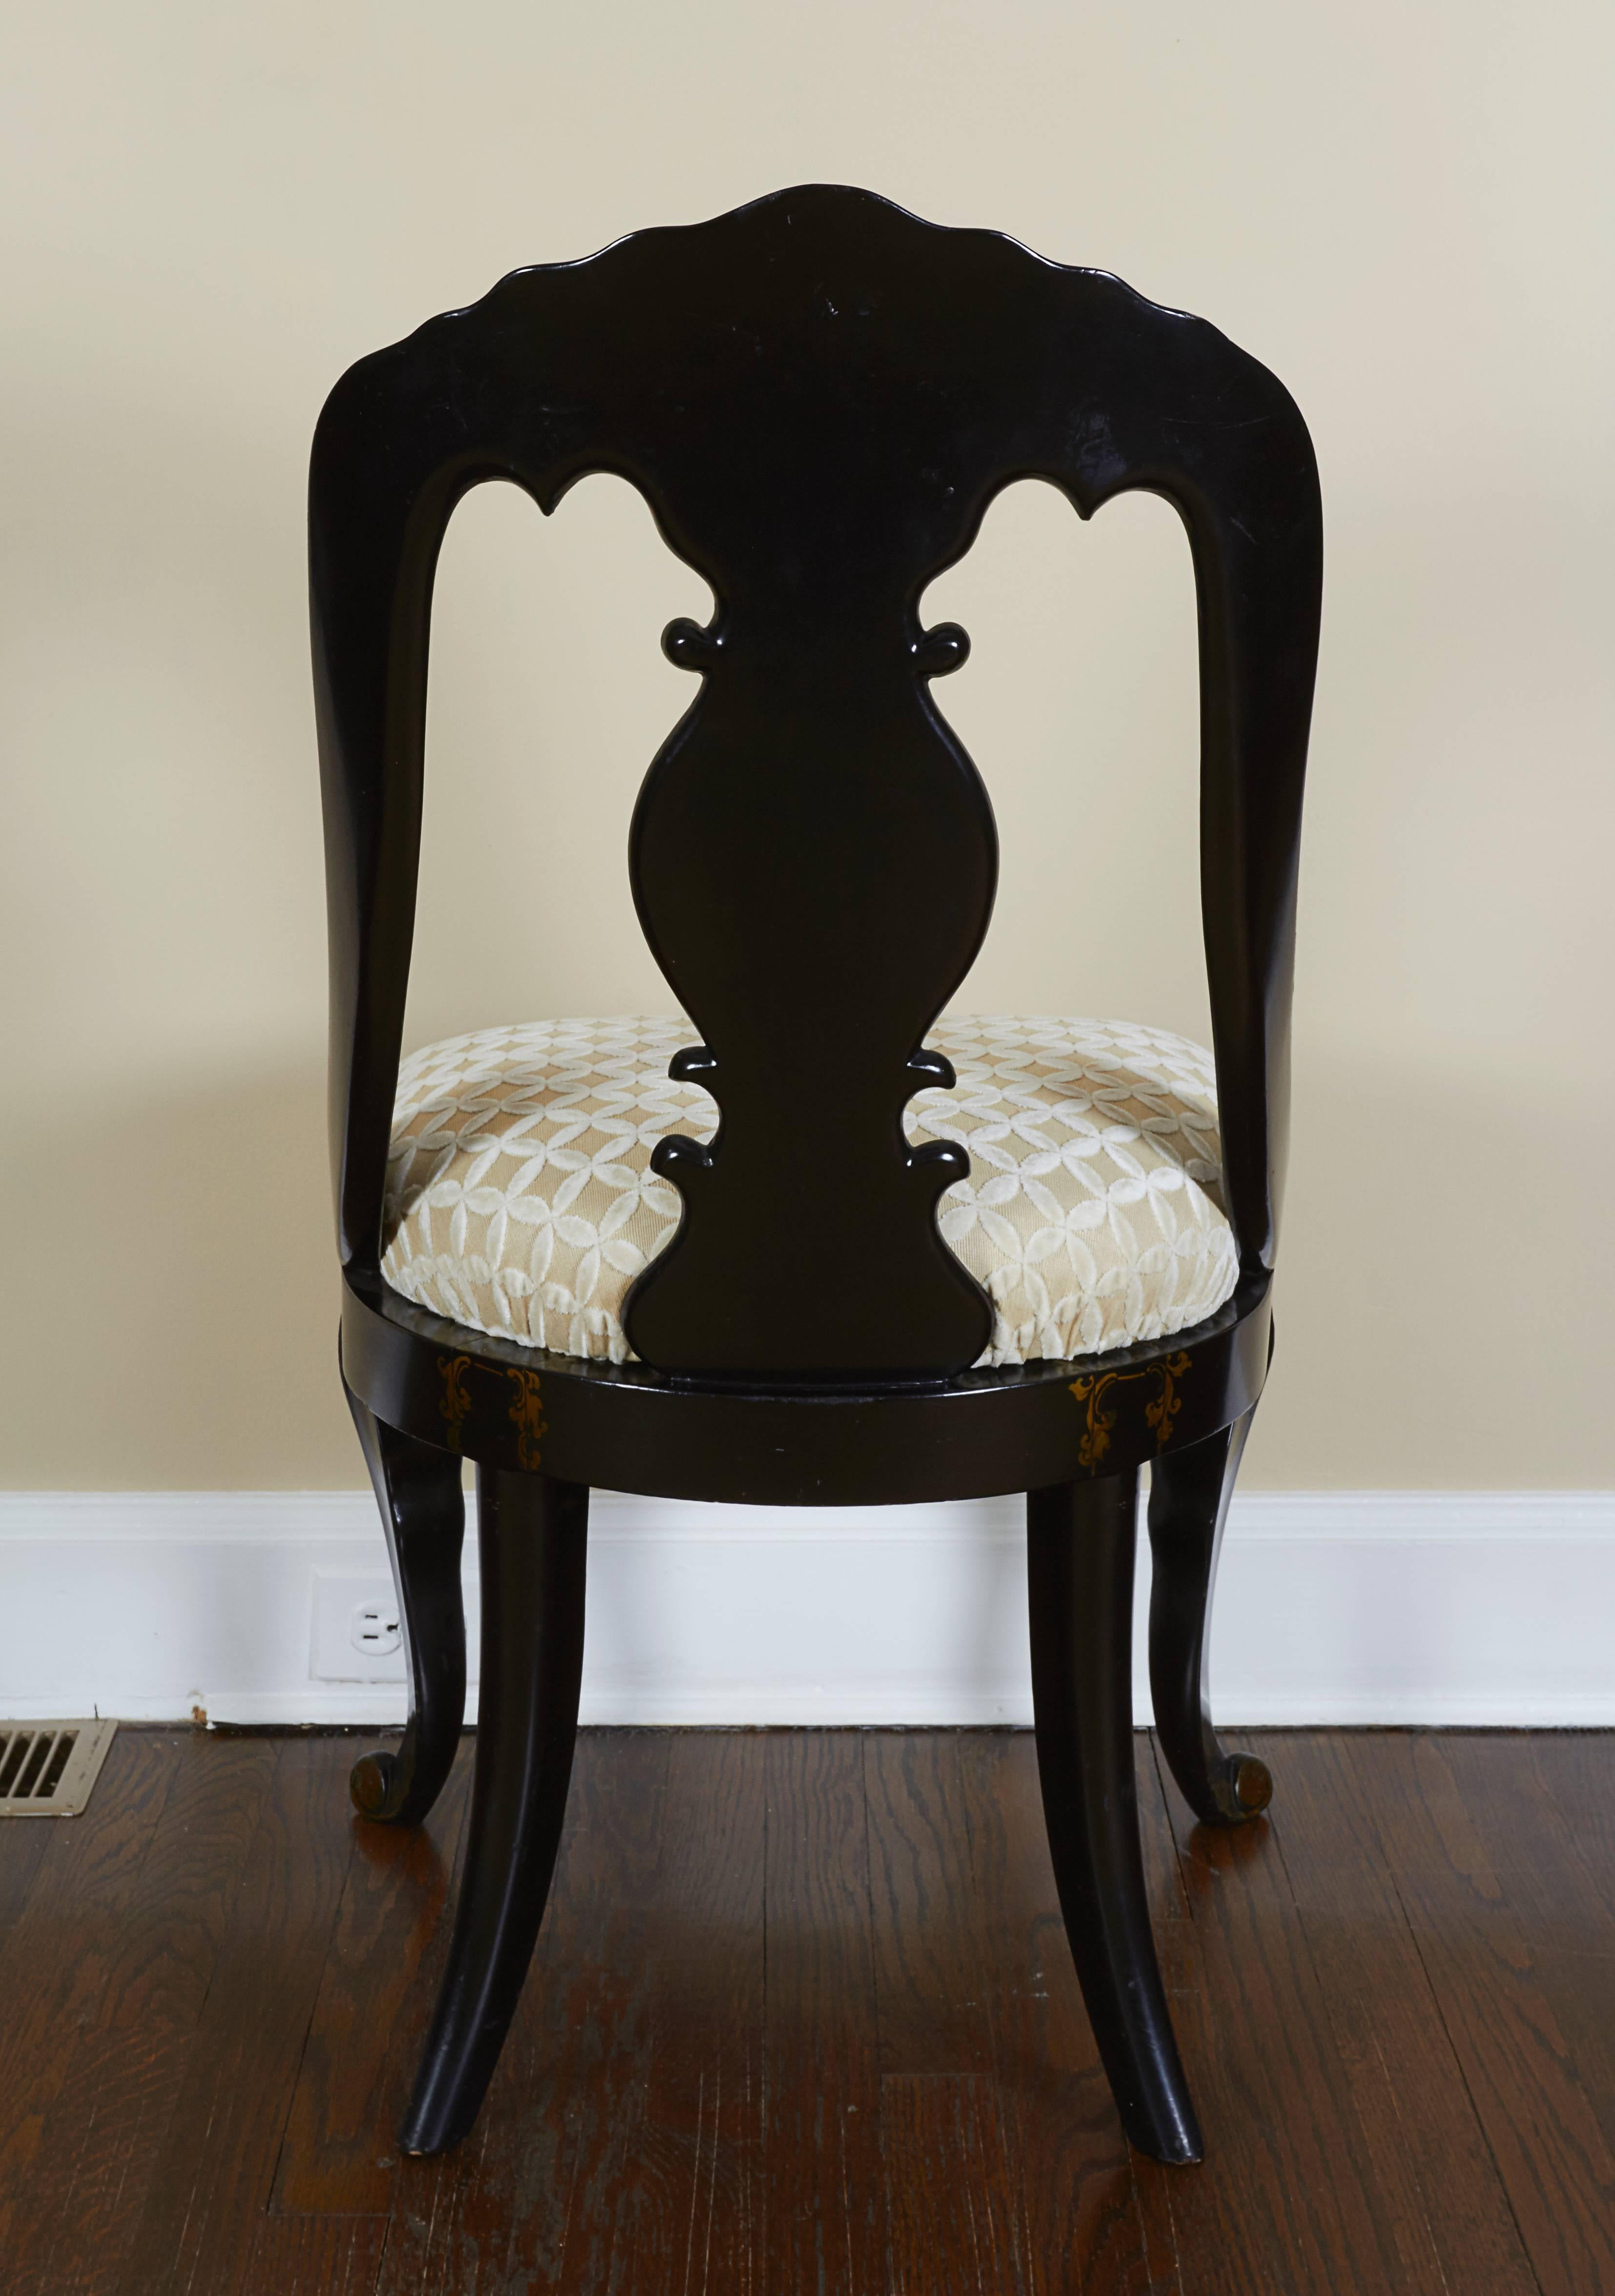 English 19th Century Black Lacquer Papier Mache Chair with Mother-of-pearl Inlay